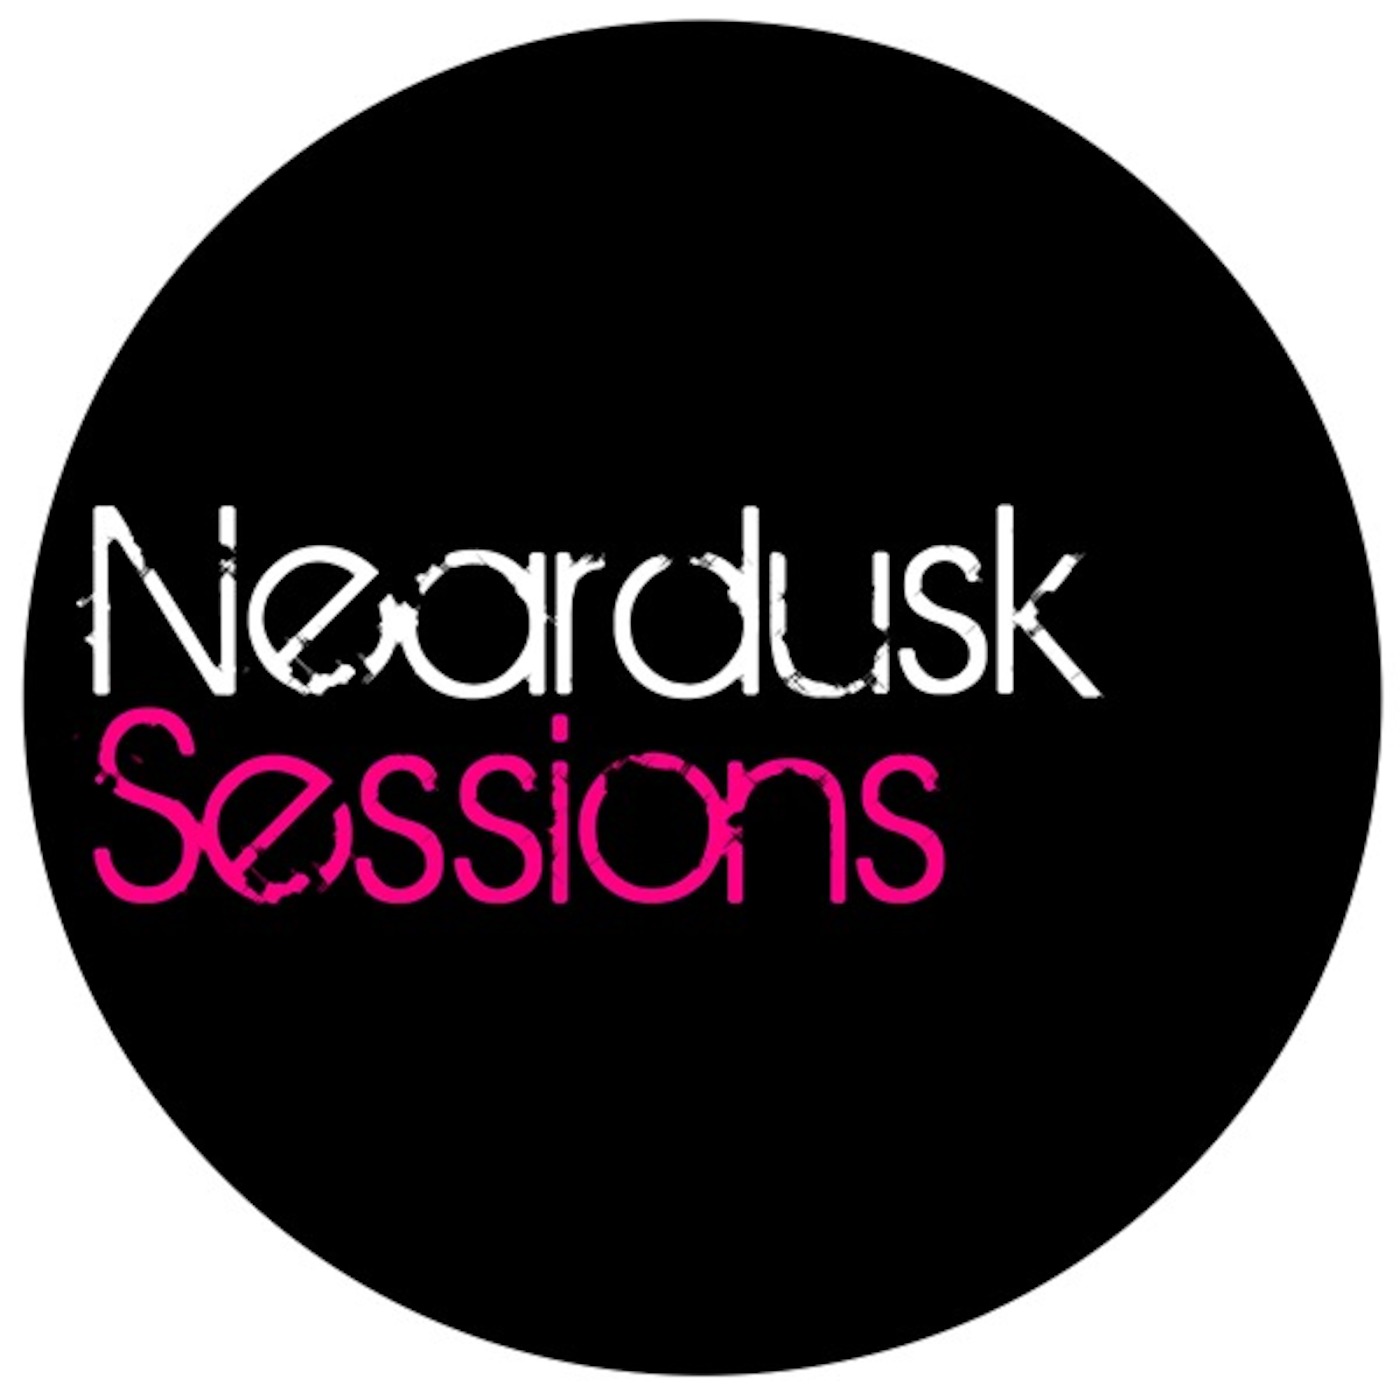 Neardusk Sessions // Session 1 : Night Creatures